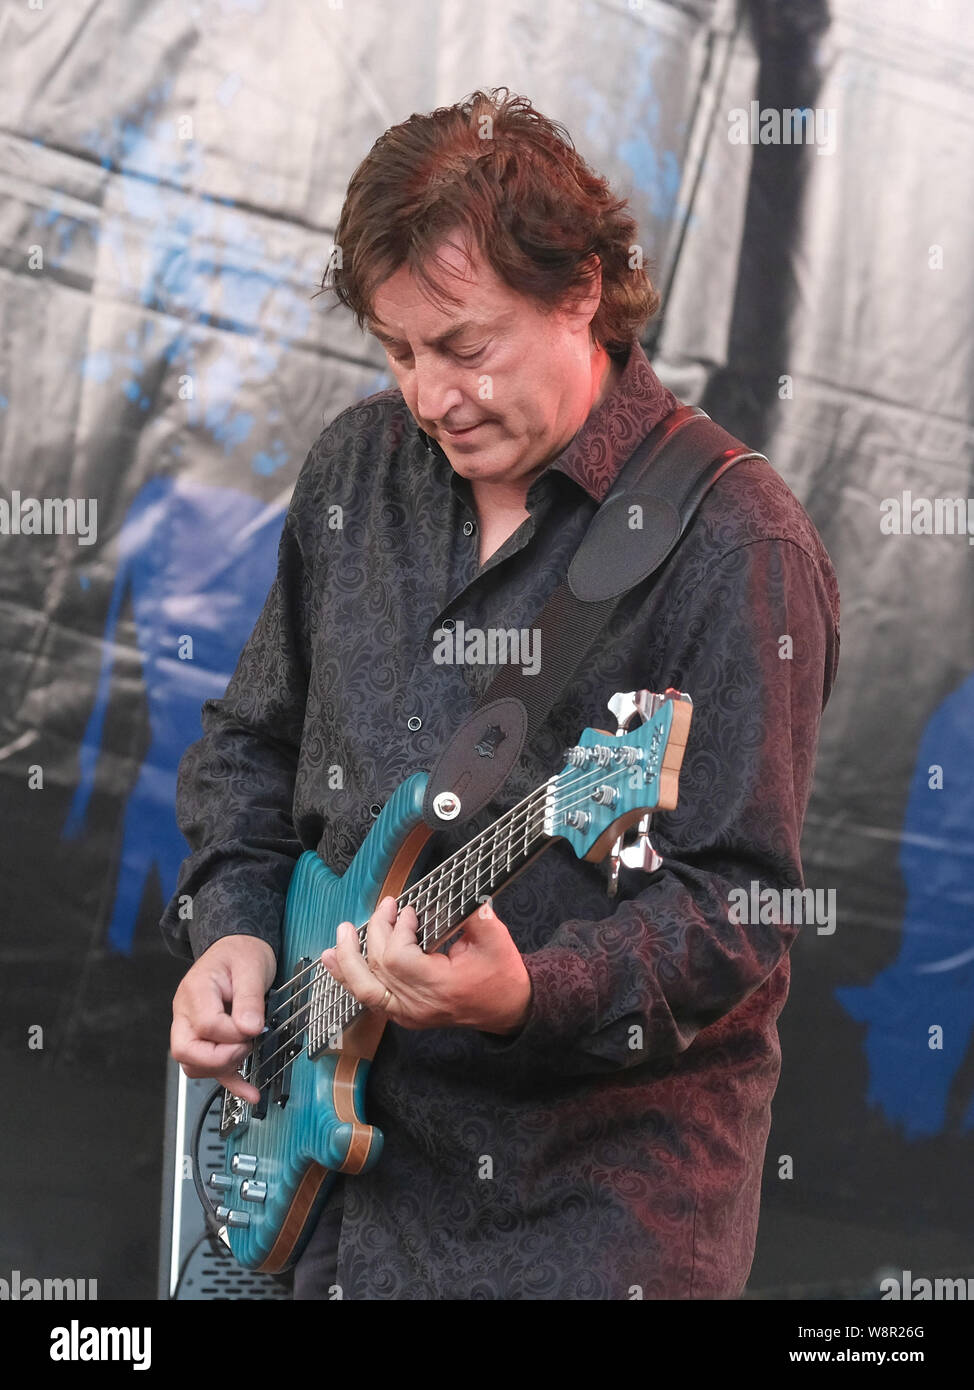 Alan Thomson, Scottish bassist performs with Martin Barre Band during the Fairport Convention's 40th anniversary at Cropredy Festival in Banbury. Stock Photo